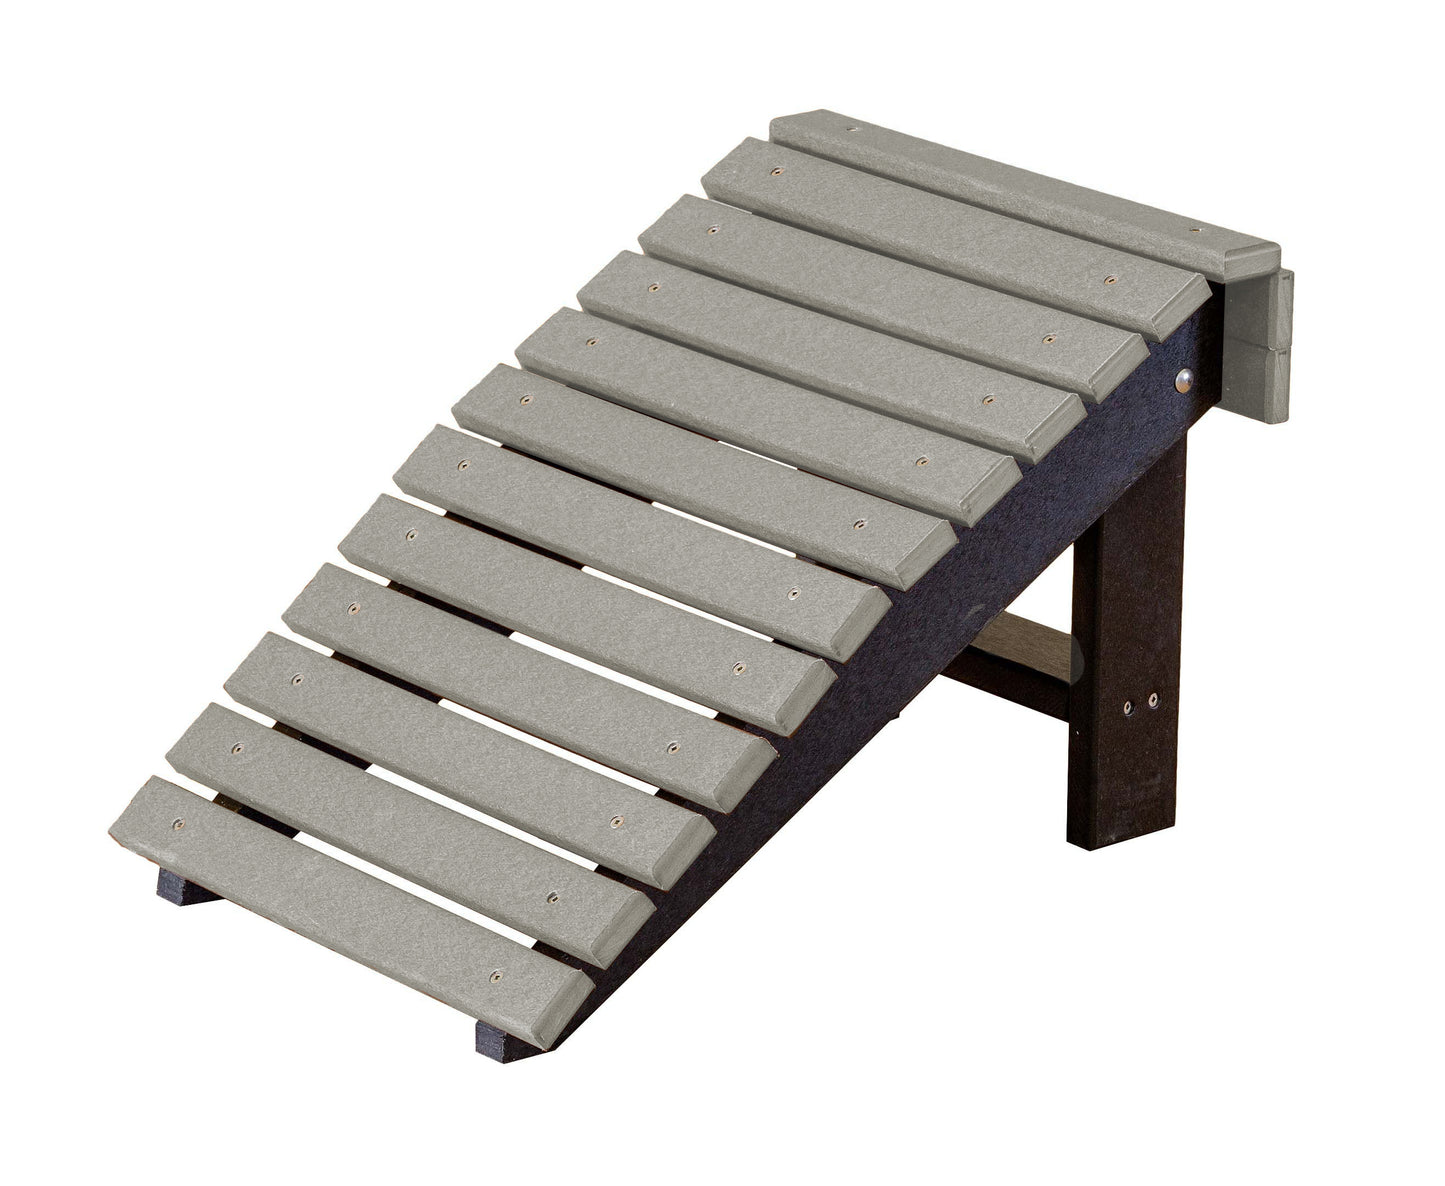 Wildridge Recycled Plastic Heritage Folding Footstool - LEAD TIME TO SHIP 6 WEEKS OR LESS